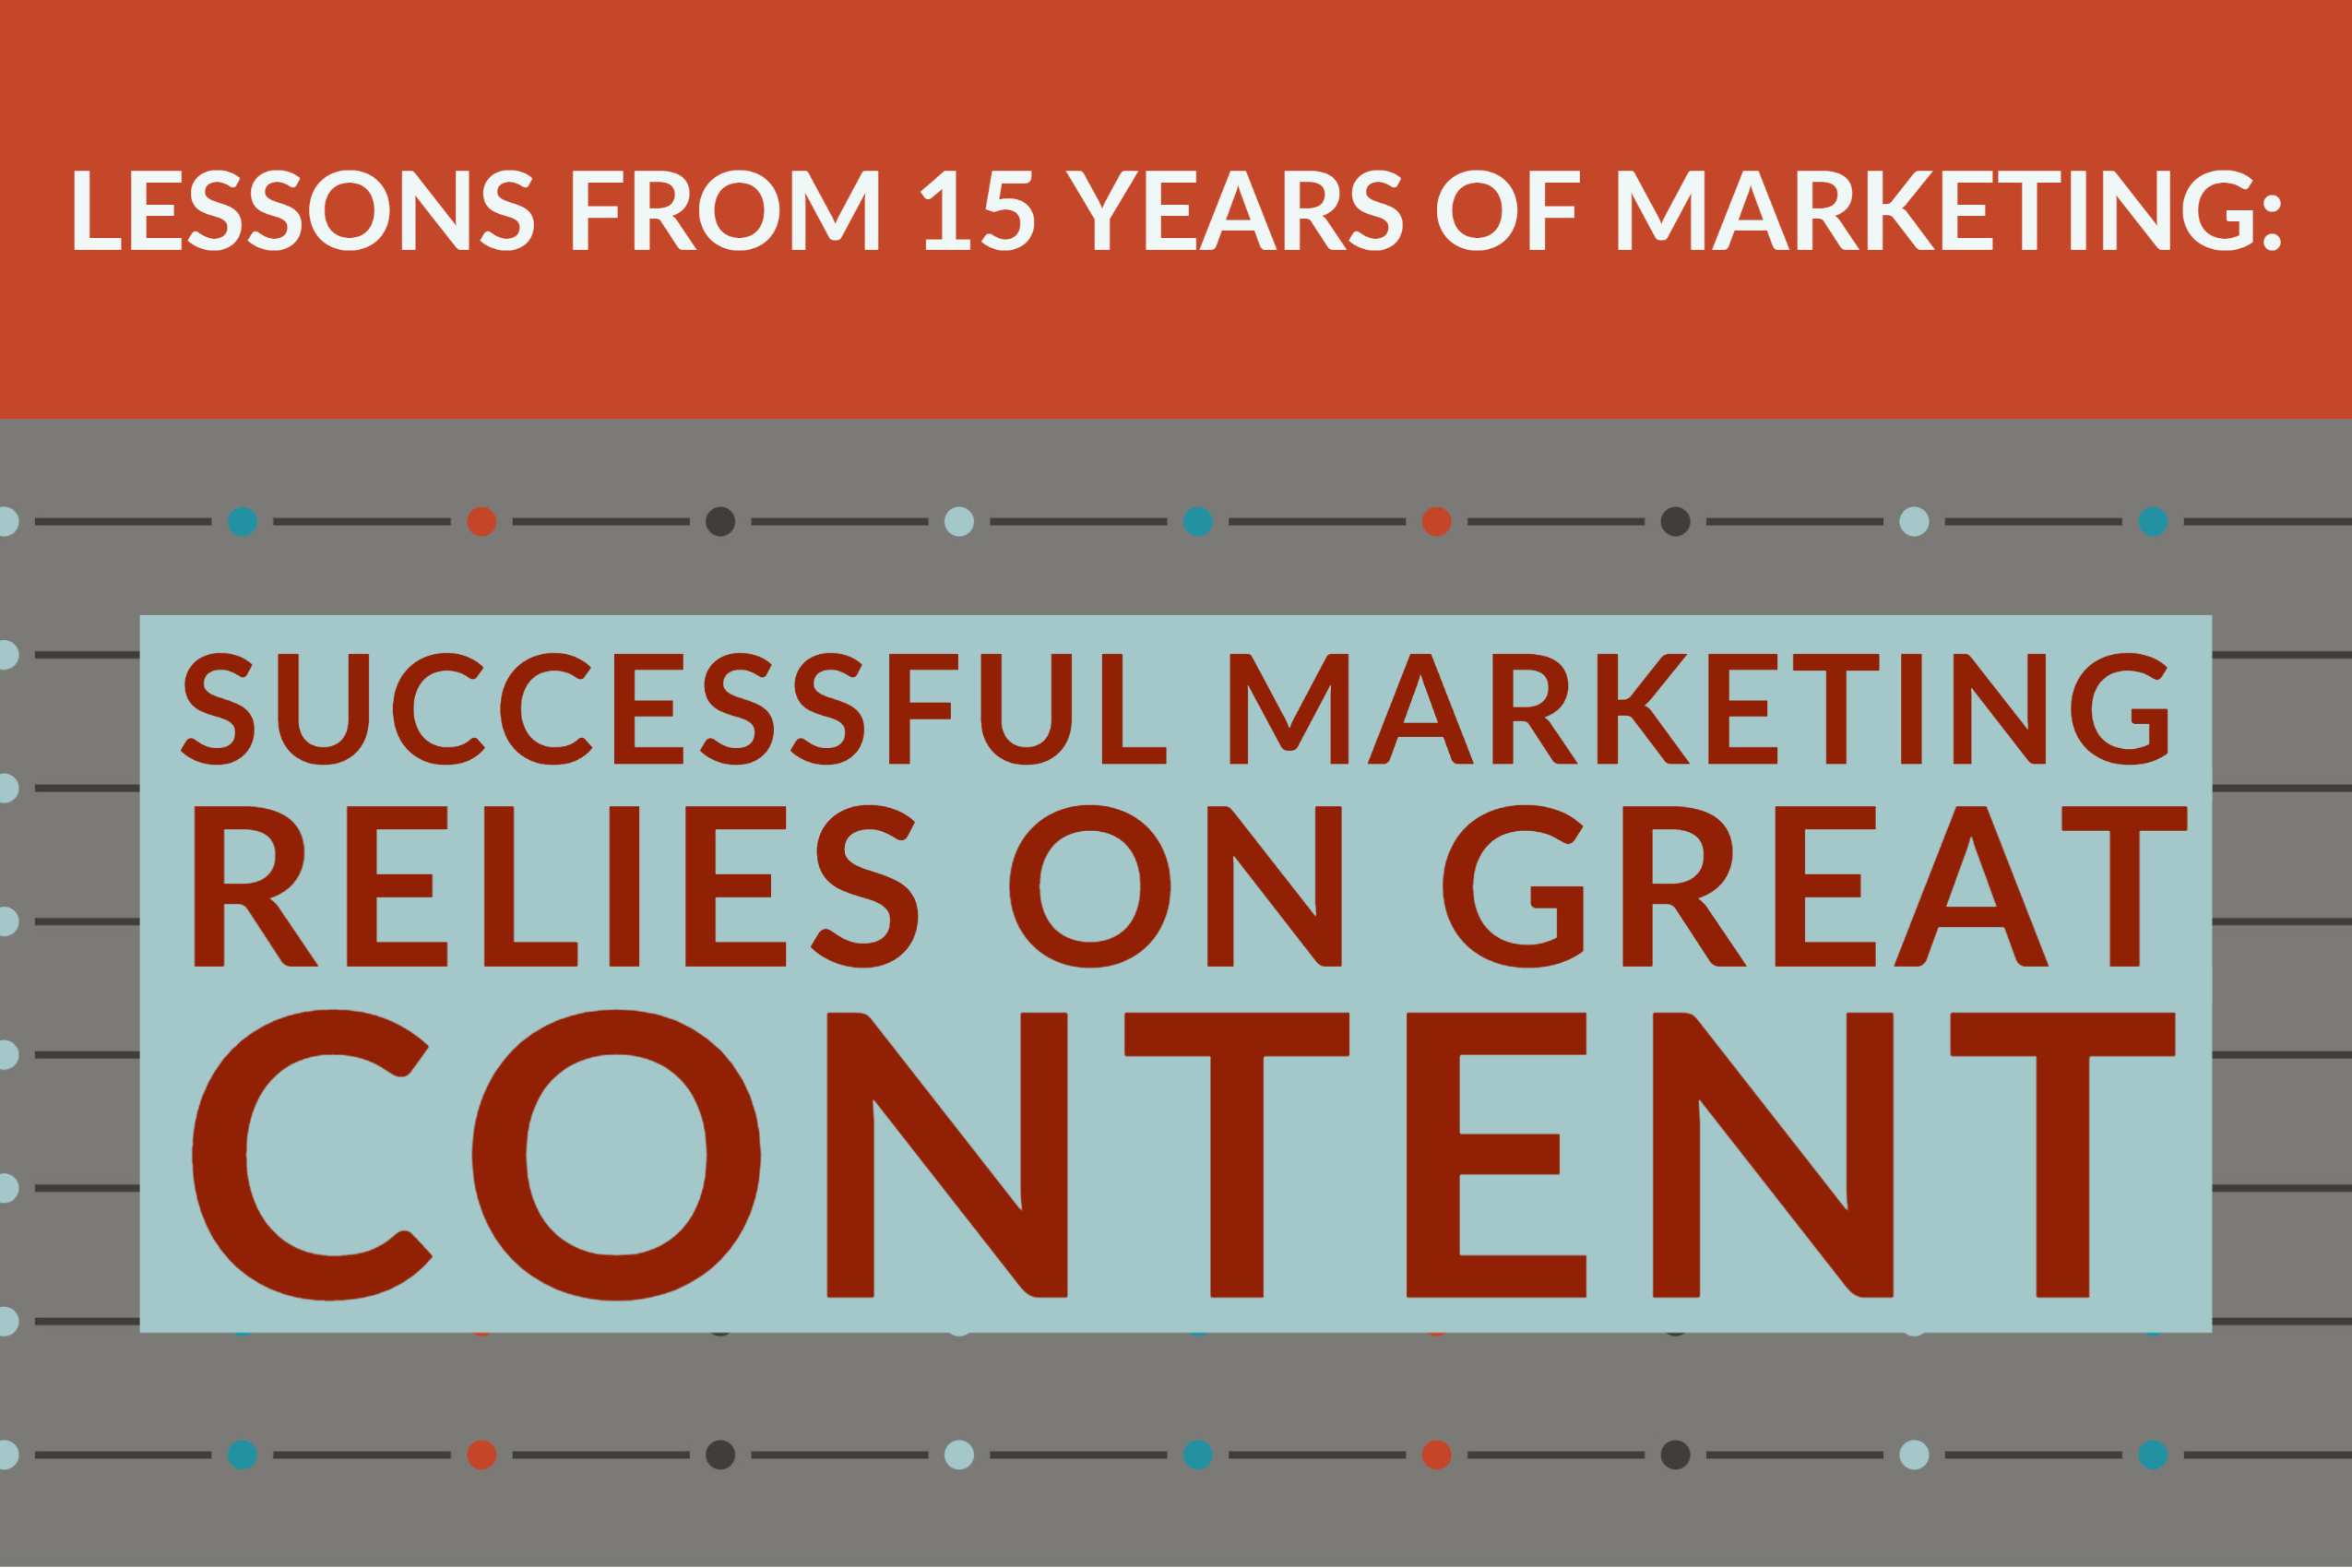 Lessons From 15 Years: Successful Marketing Relies On Great Content